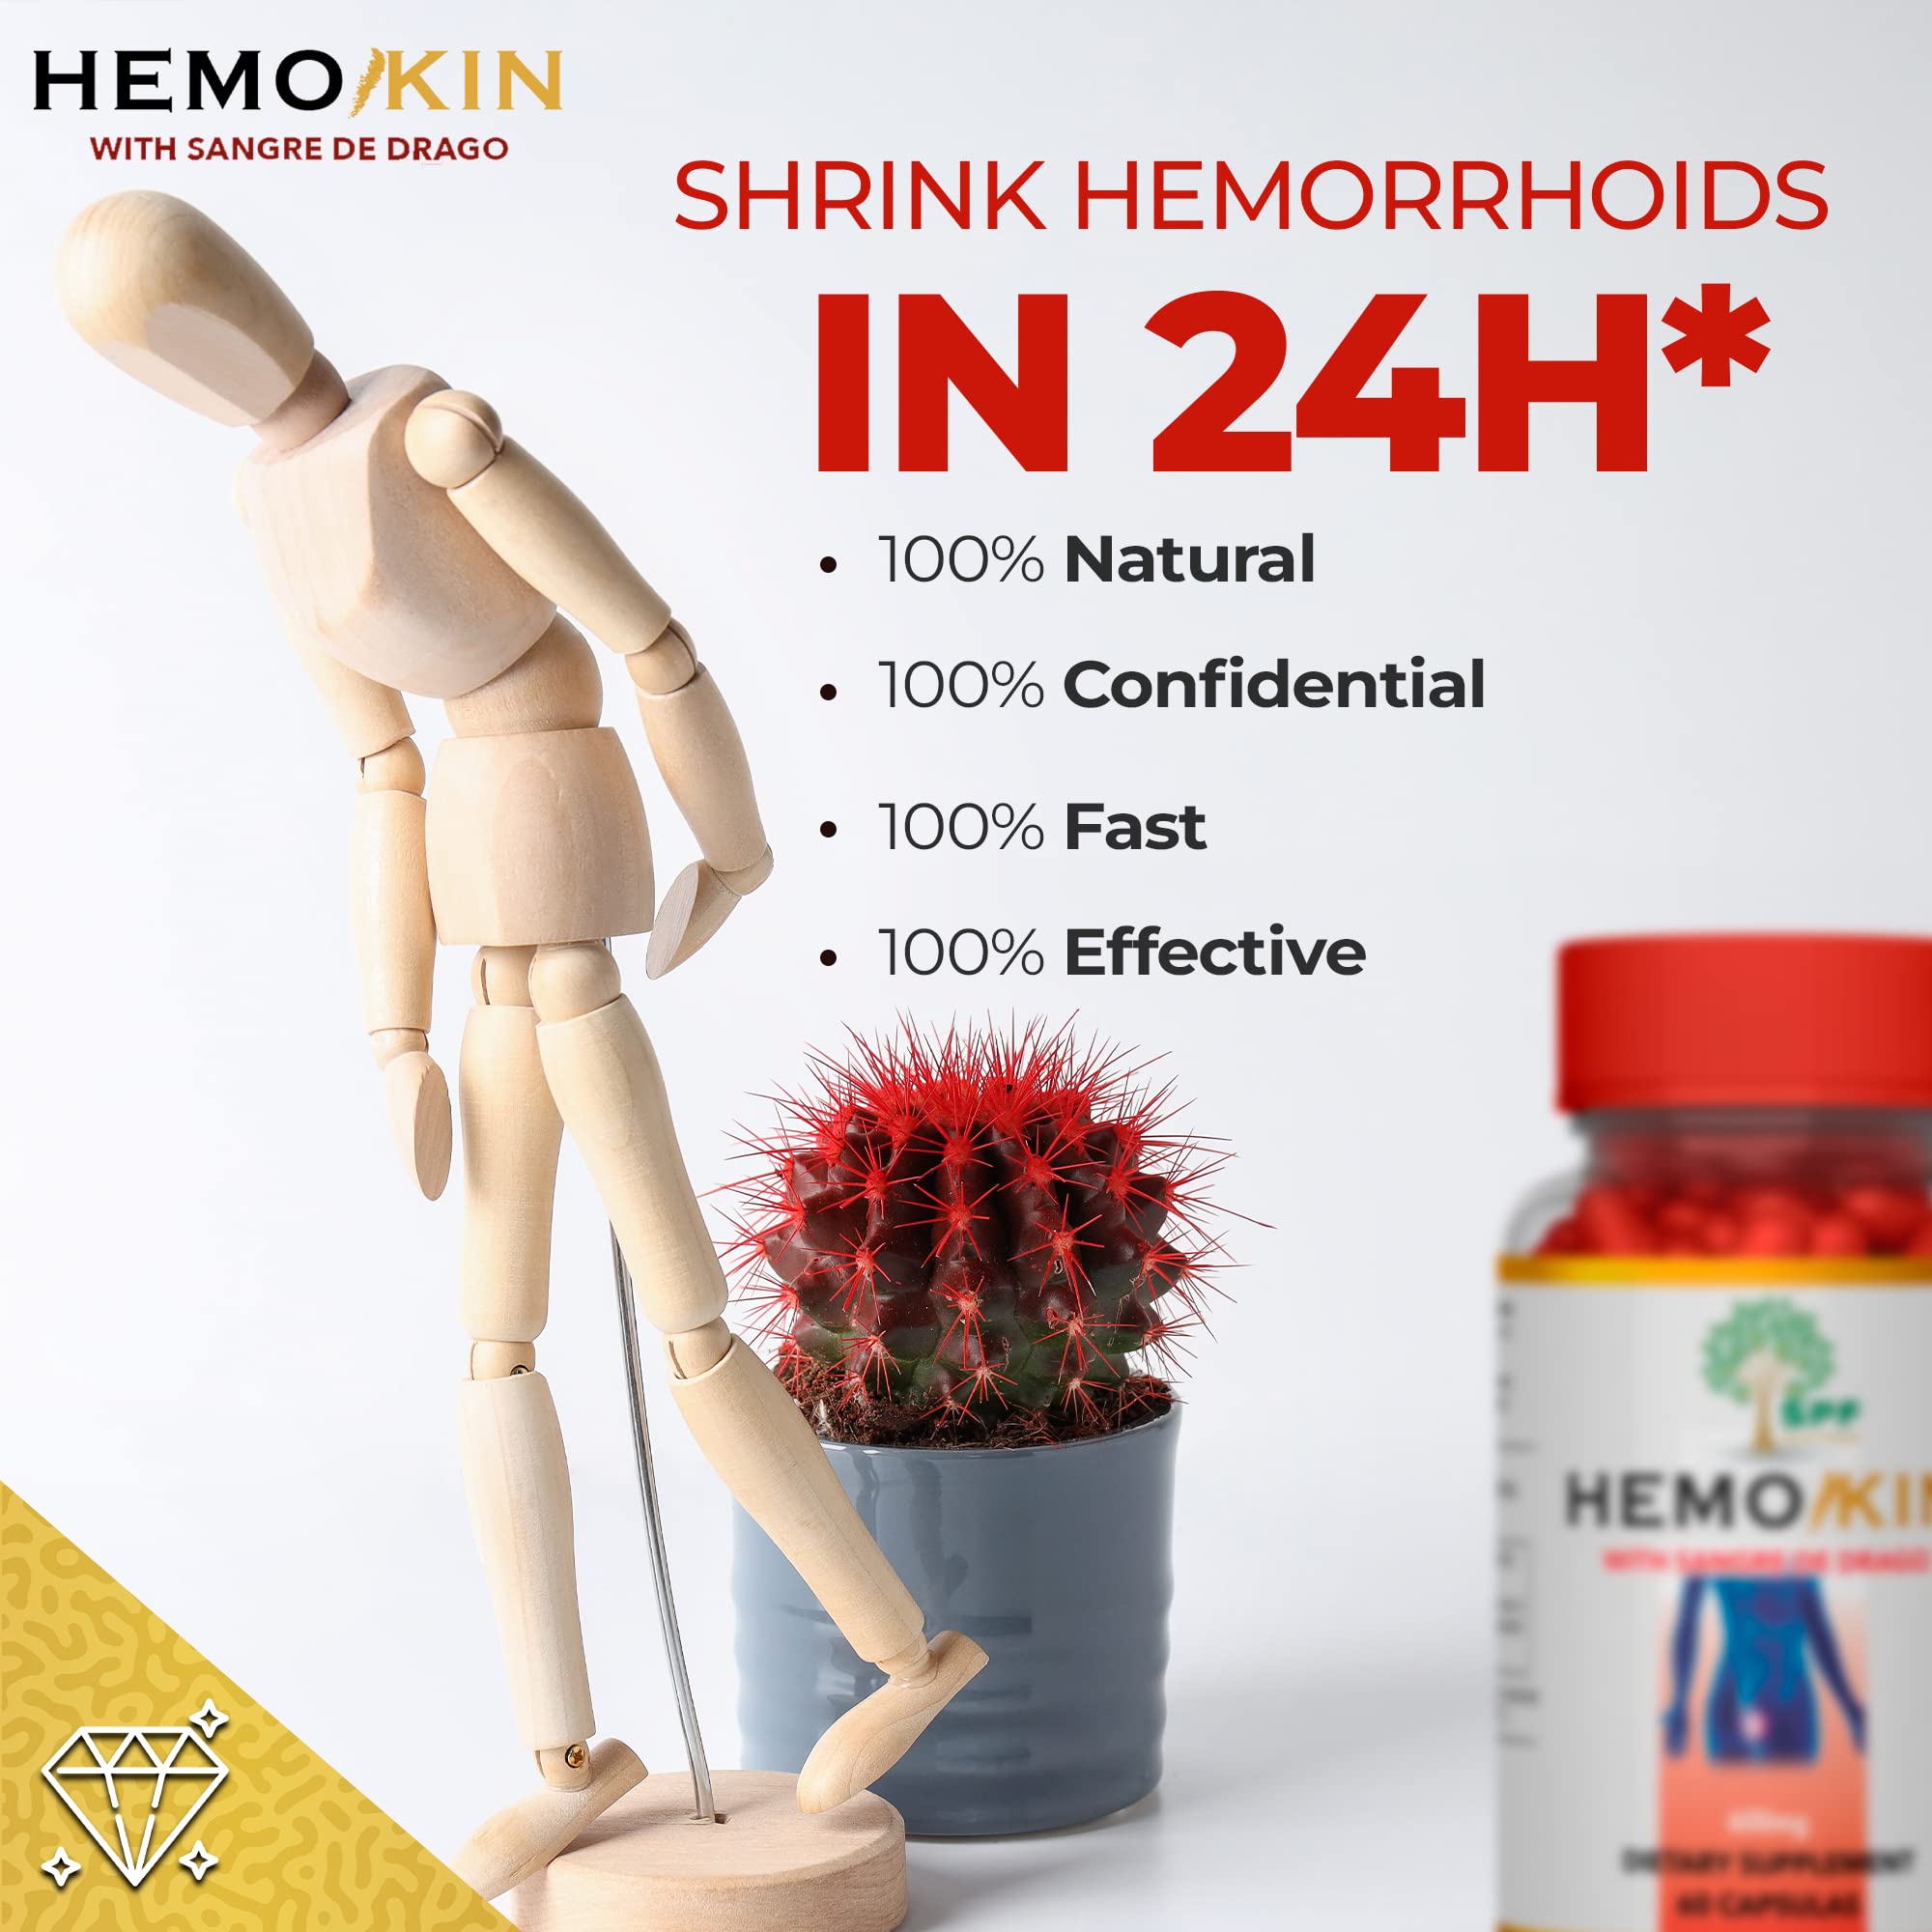 SPF HEMOKIN with Sangre de Drago – Hemorrhoid and Fissure Relief Supplement, Helps with Itching, Swelling (60 Caps) Natural Products. (1)